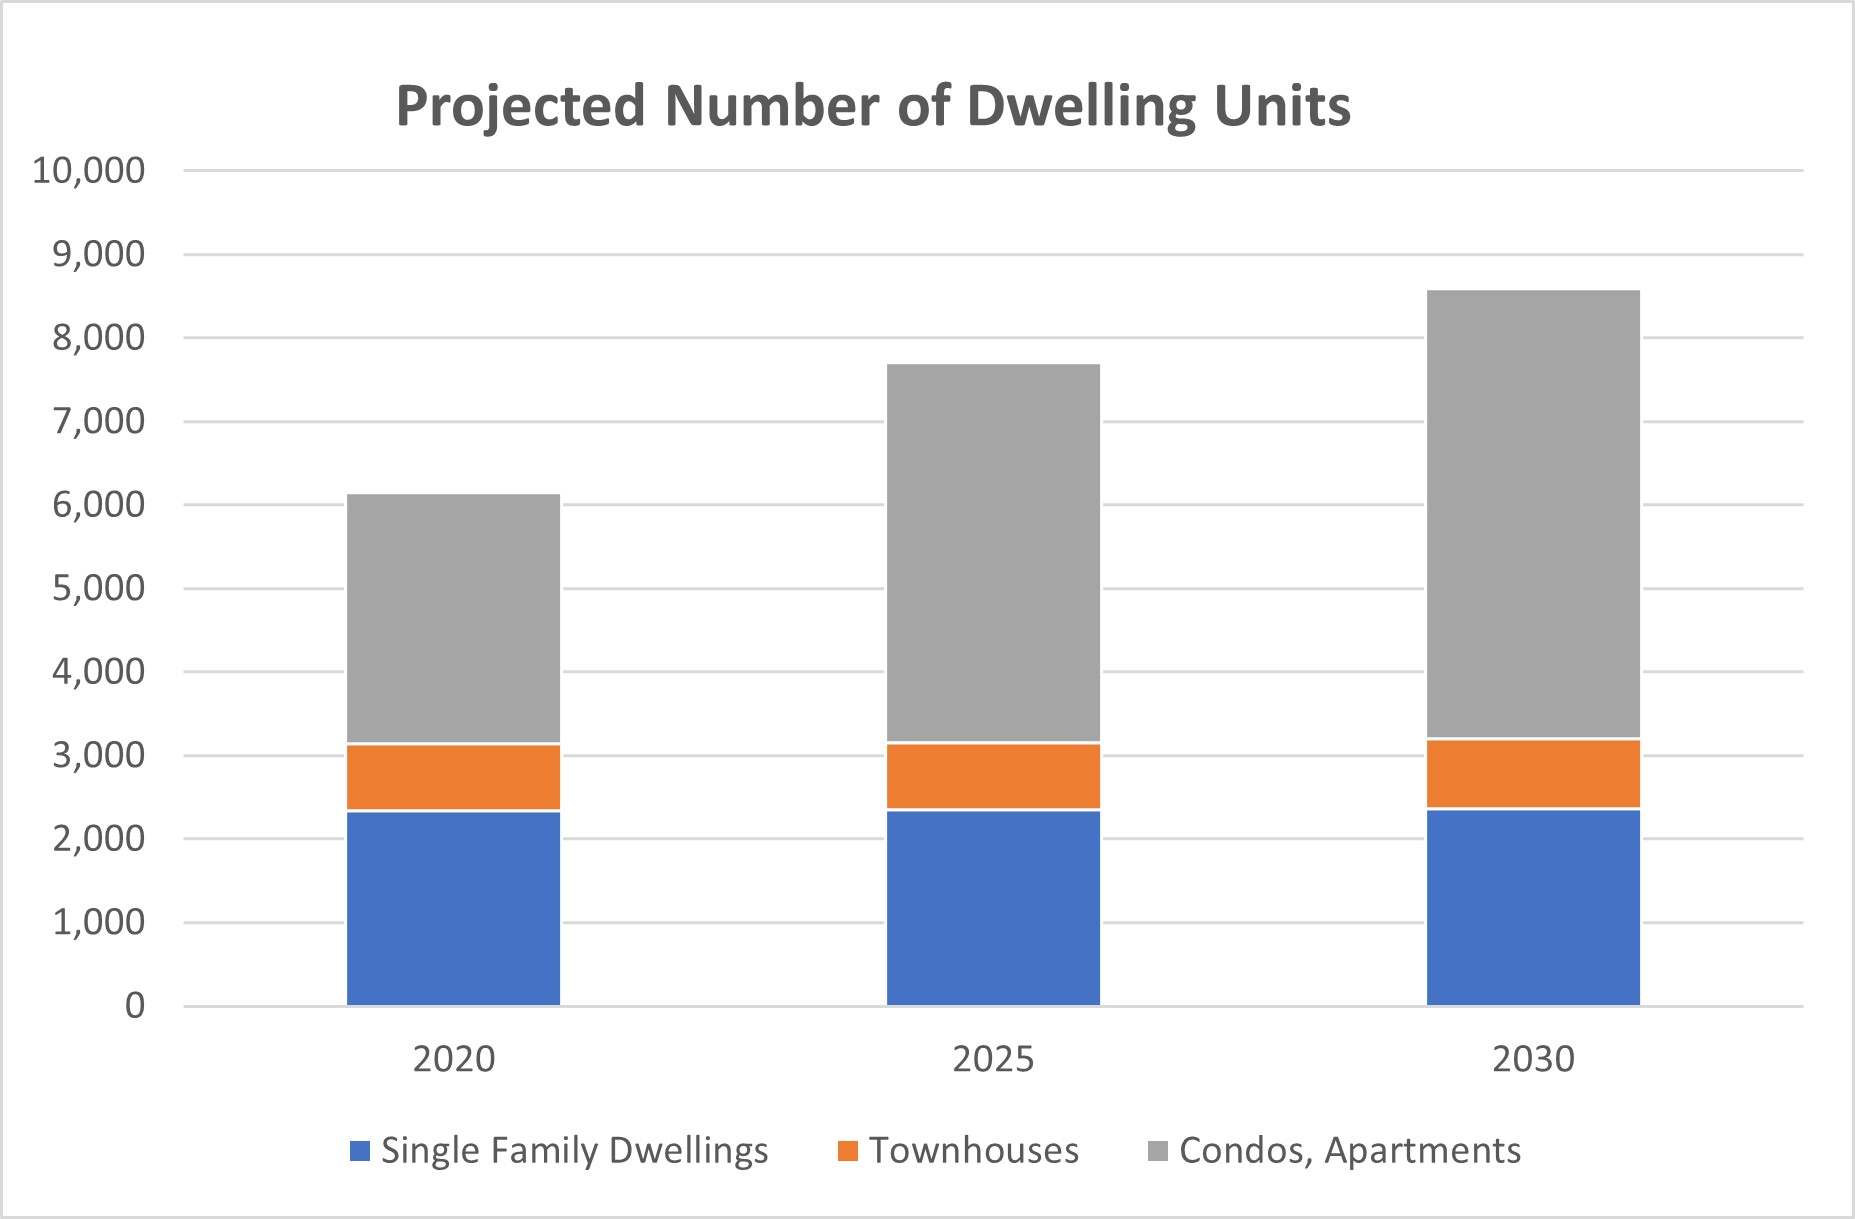 Projected number of dwelling units